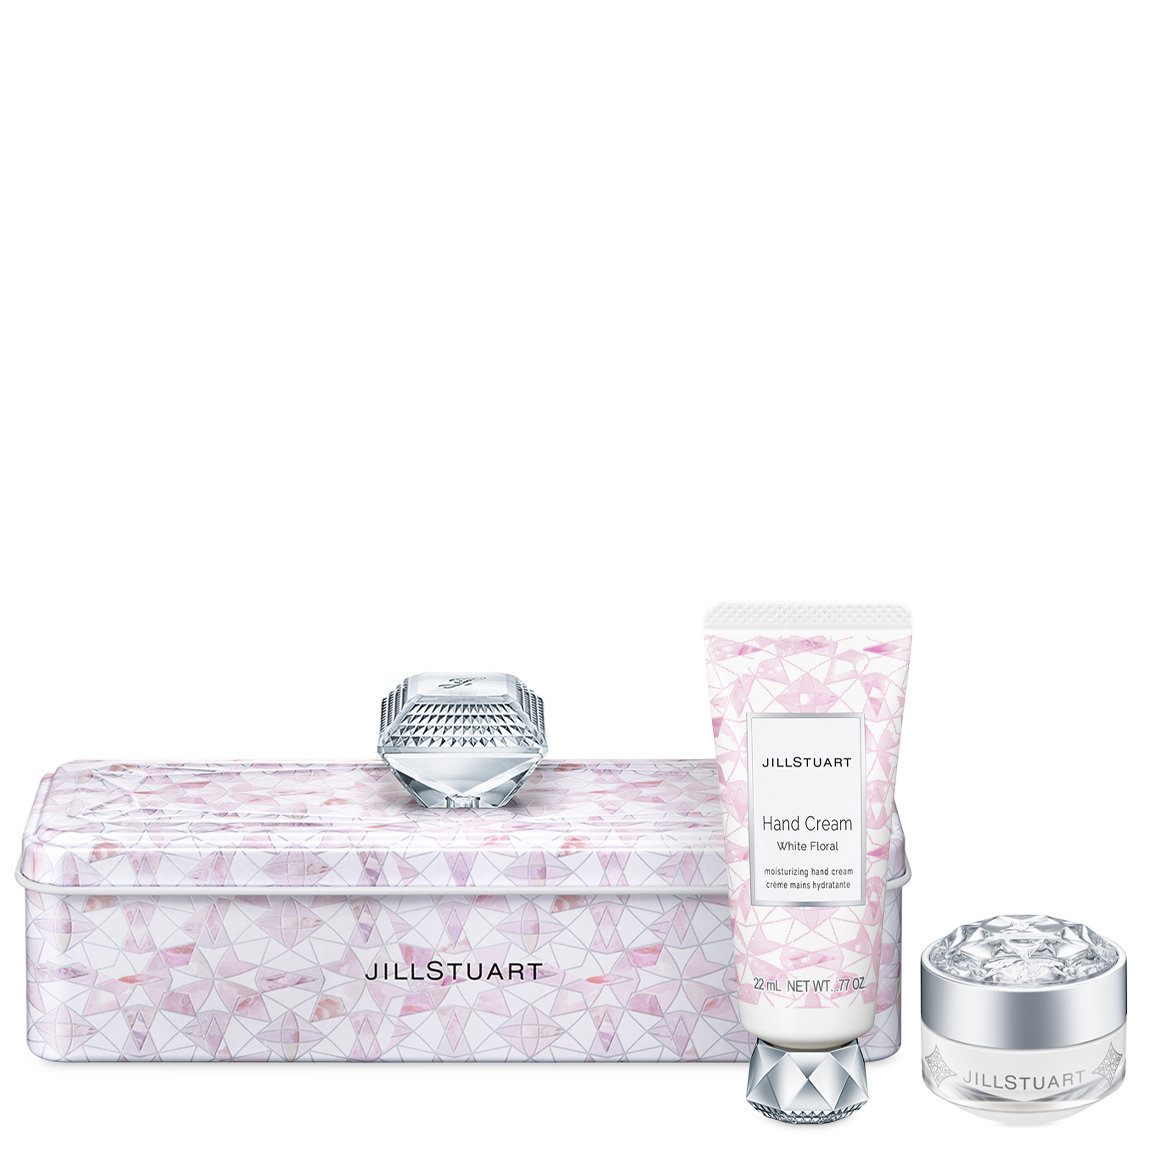 JILL STUART Beauty Lip & Hand Care Gift Collection Set White Floral alternative view 1.